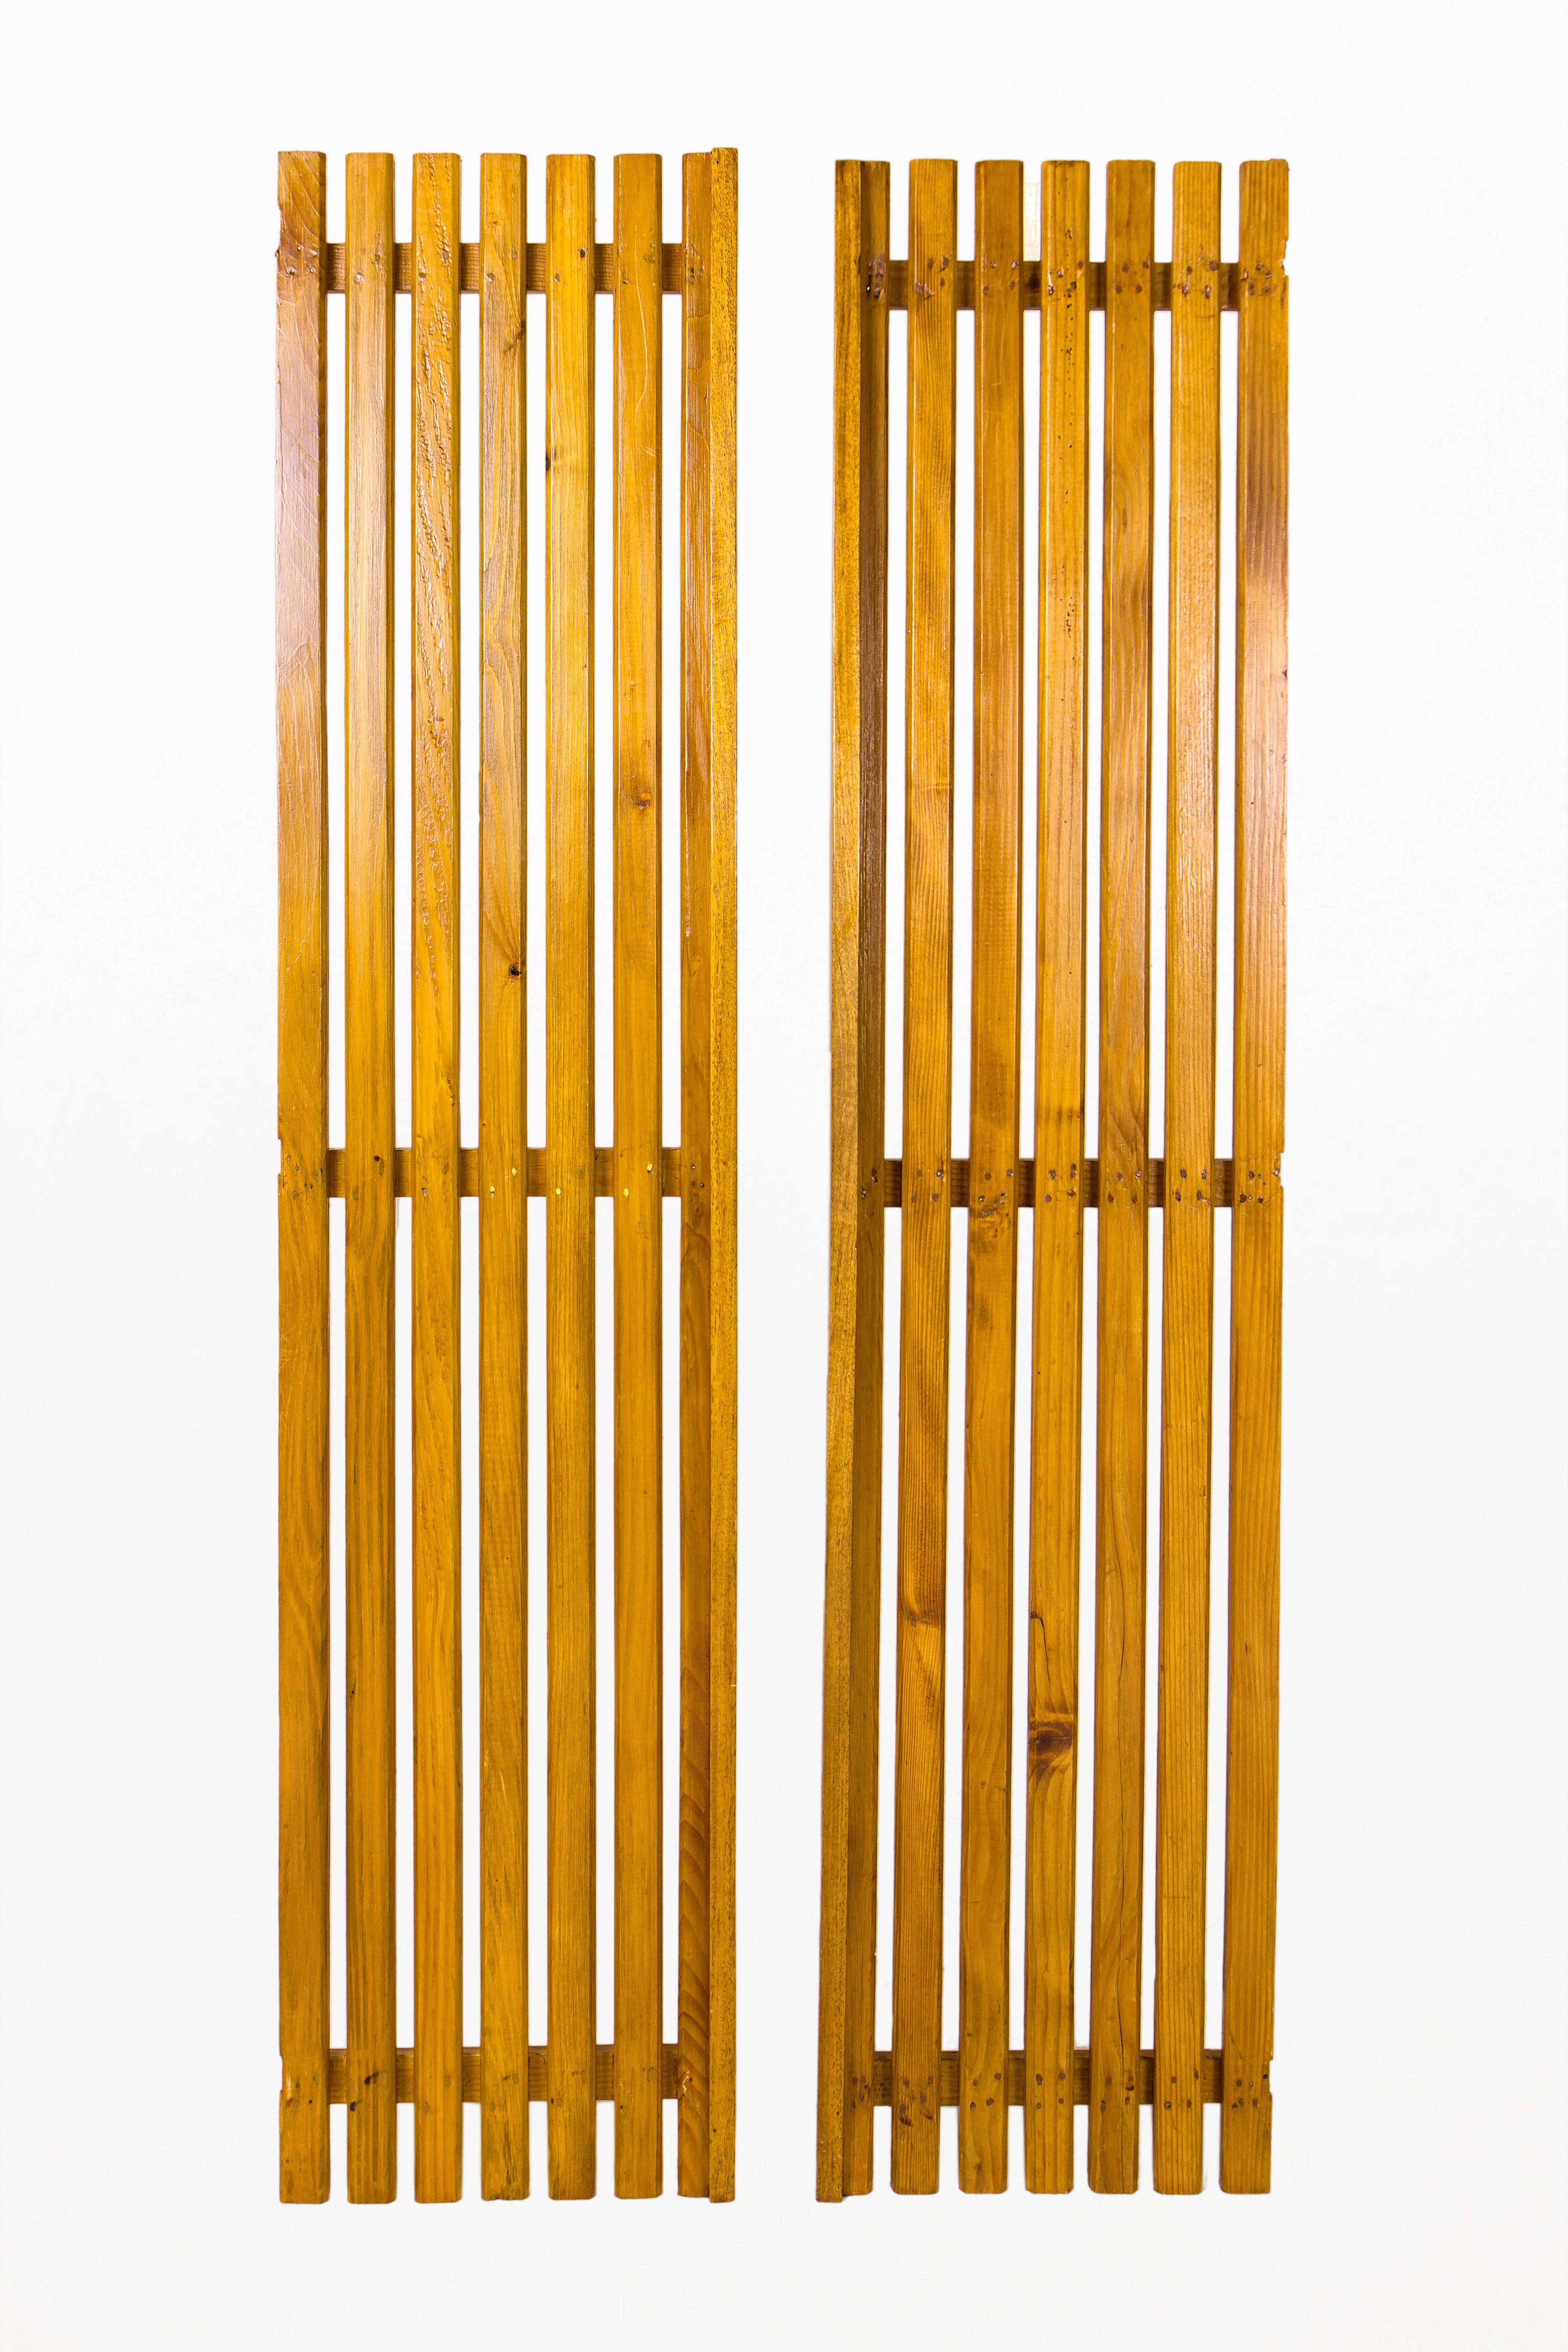 Set of three pairs of Charlotte Perriand large slat doors
Hisotry: Le Courboulay Building, Le Mans, France
Provenance: Gallery Clément Cidivino,
circa 1950, France
Very good vintage condition.
Charlotte Perriand (Paris, October 24, 1903 - October